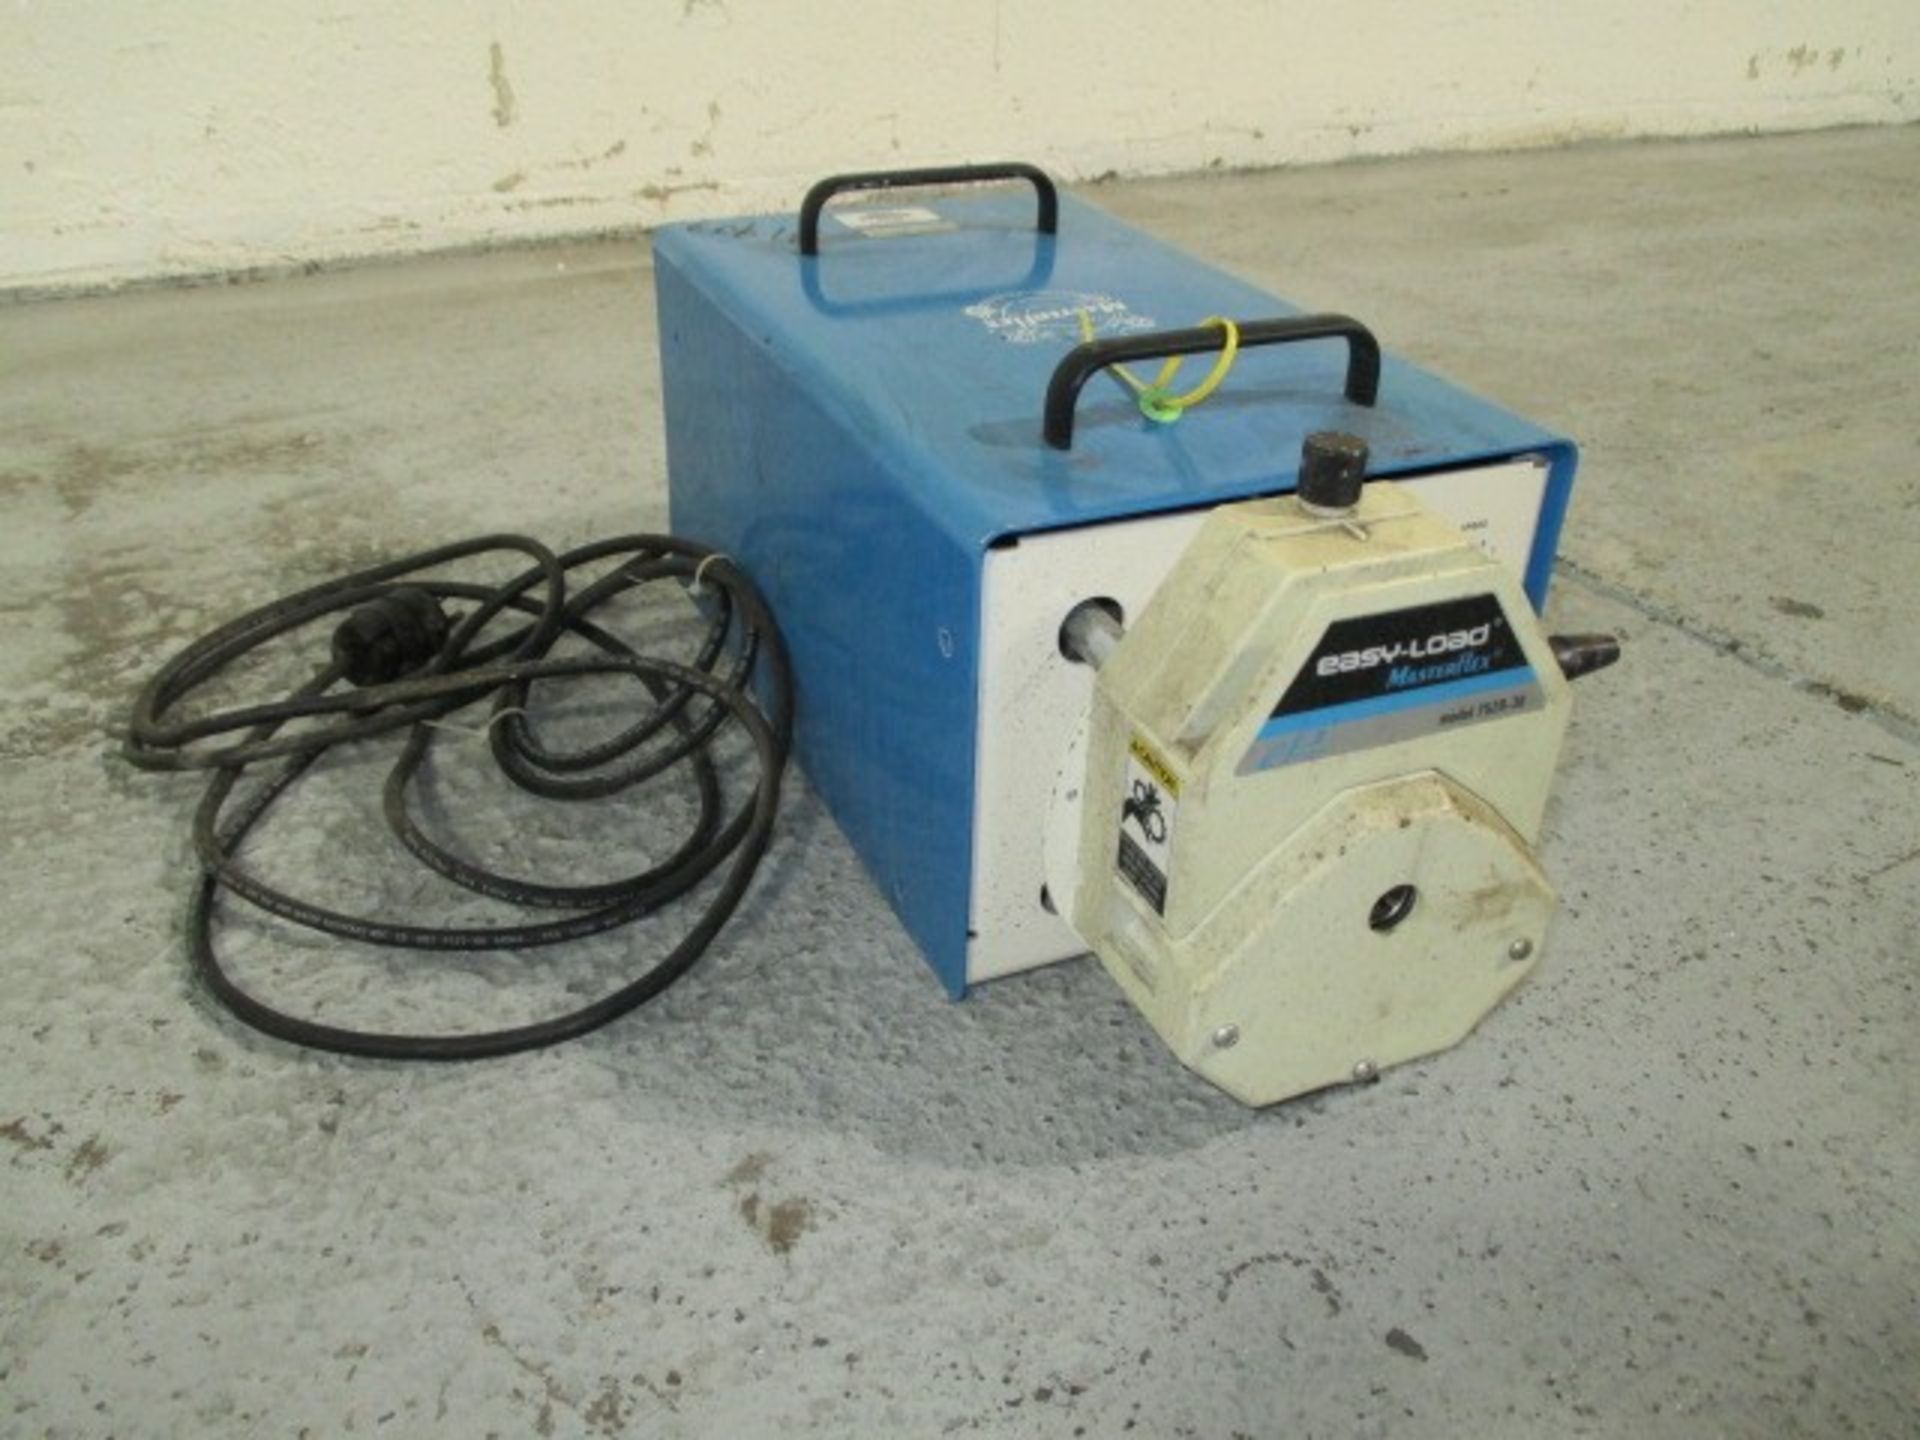 Cole-Parmer peristalic pump, model 7529-10, masterflex design with model 7549-32 variable speed